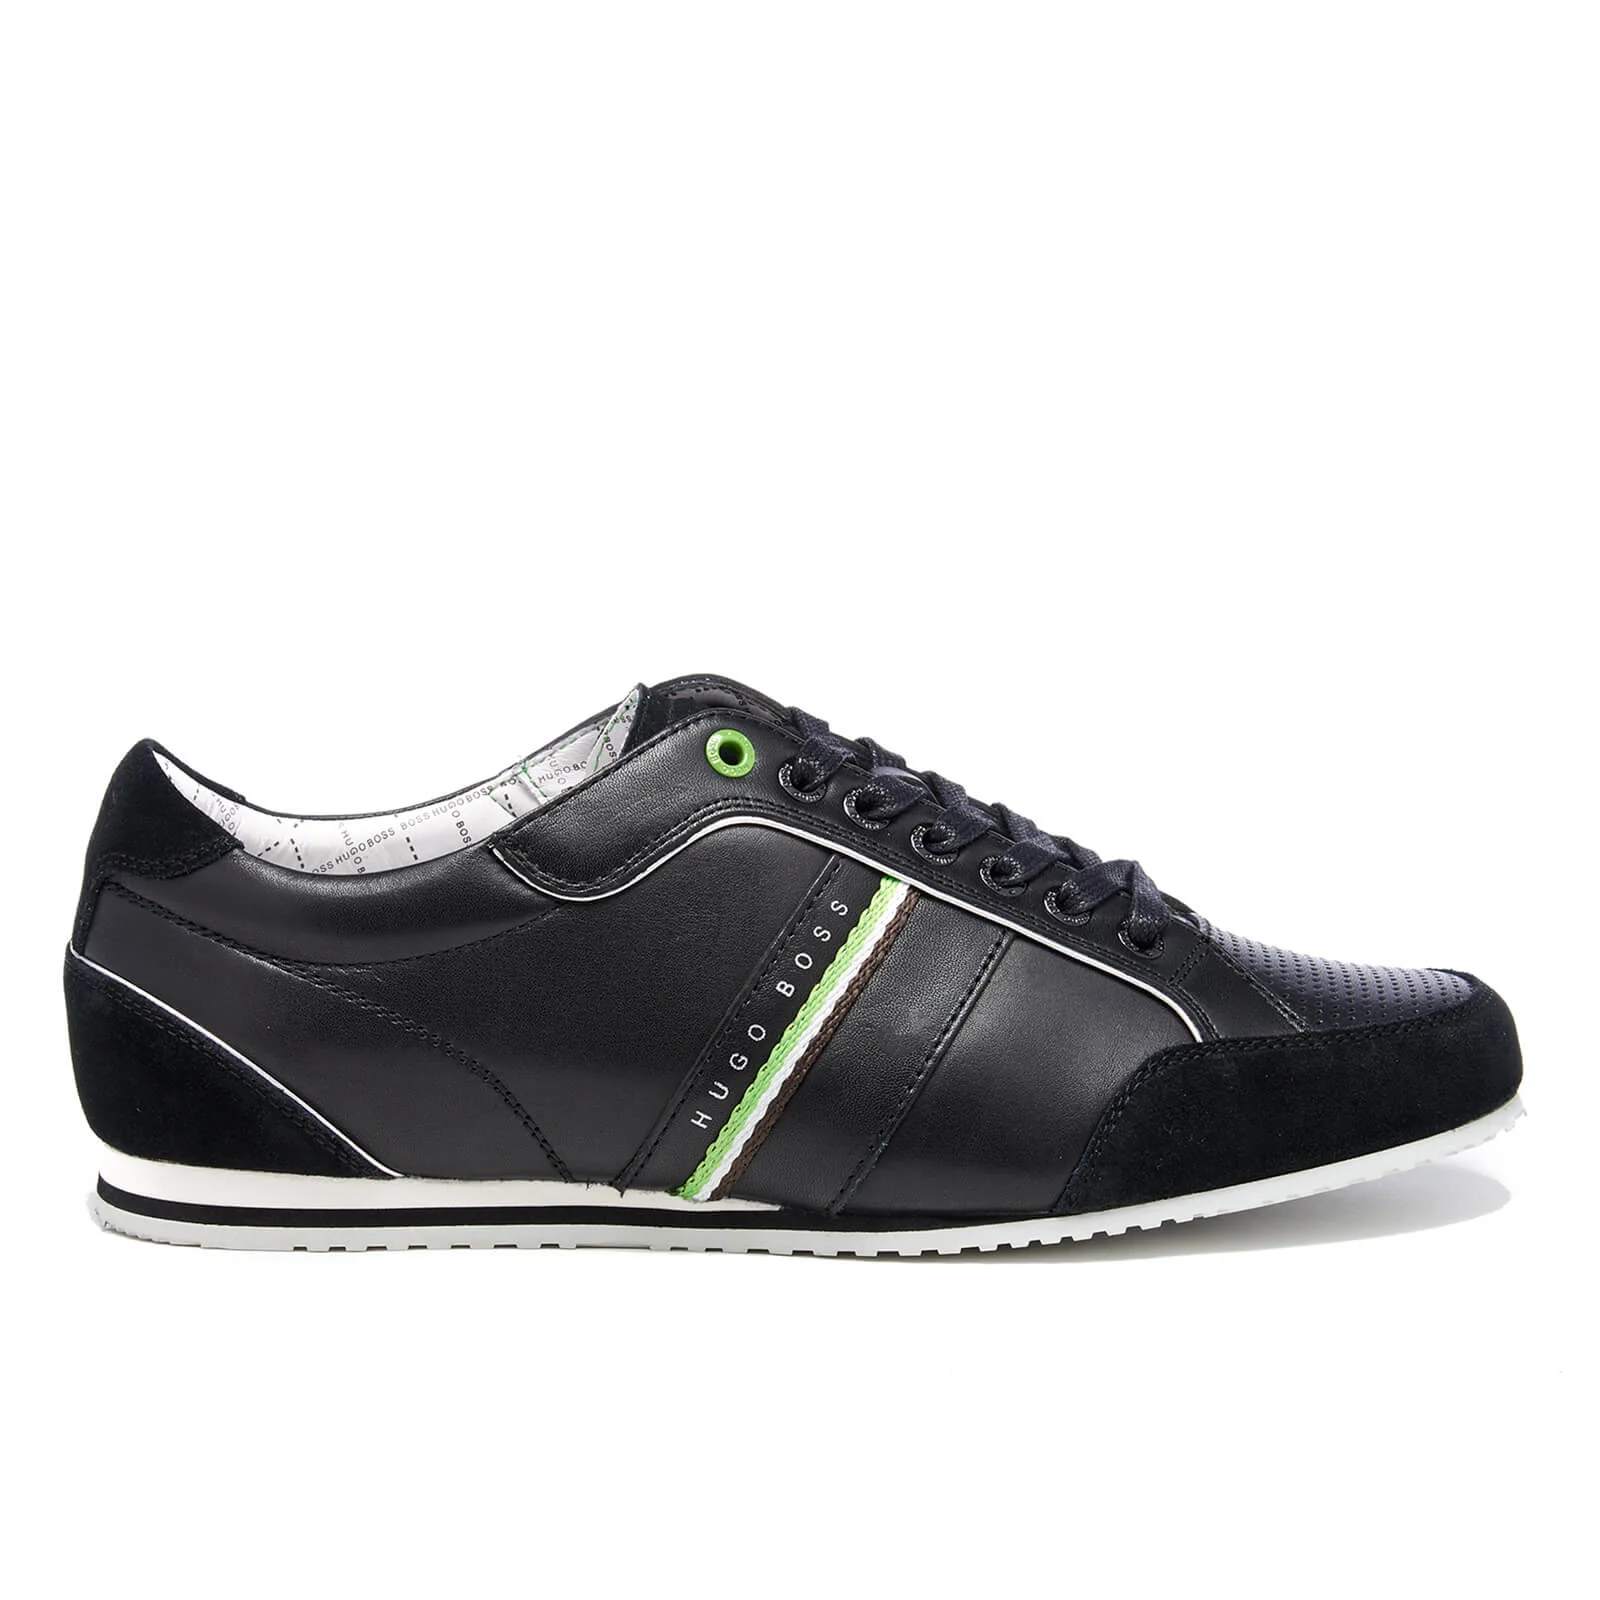 BOSS Green Men's Victoire LA Leather Trainers - Charcoal Image 1